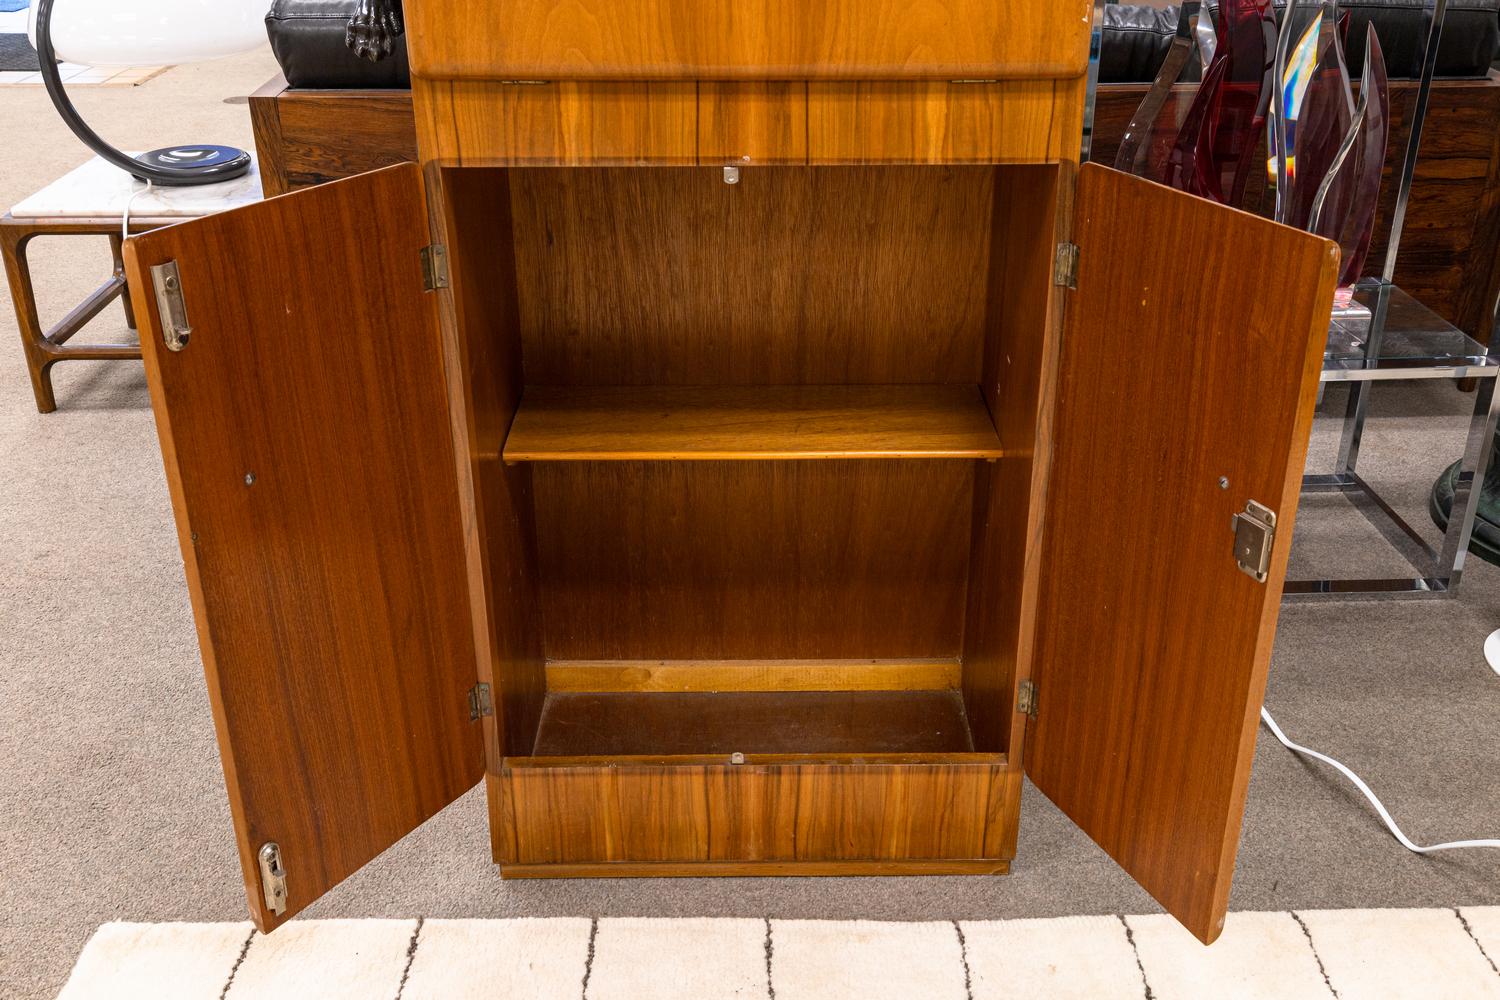 20th Century Art Deco Flip Top Dry Bar Cabinet by George Serlin for Sureline Furniture London